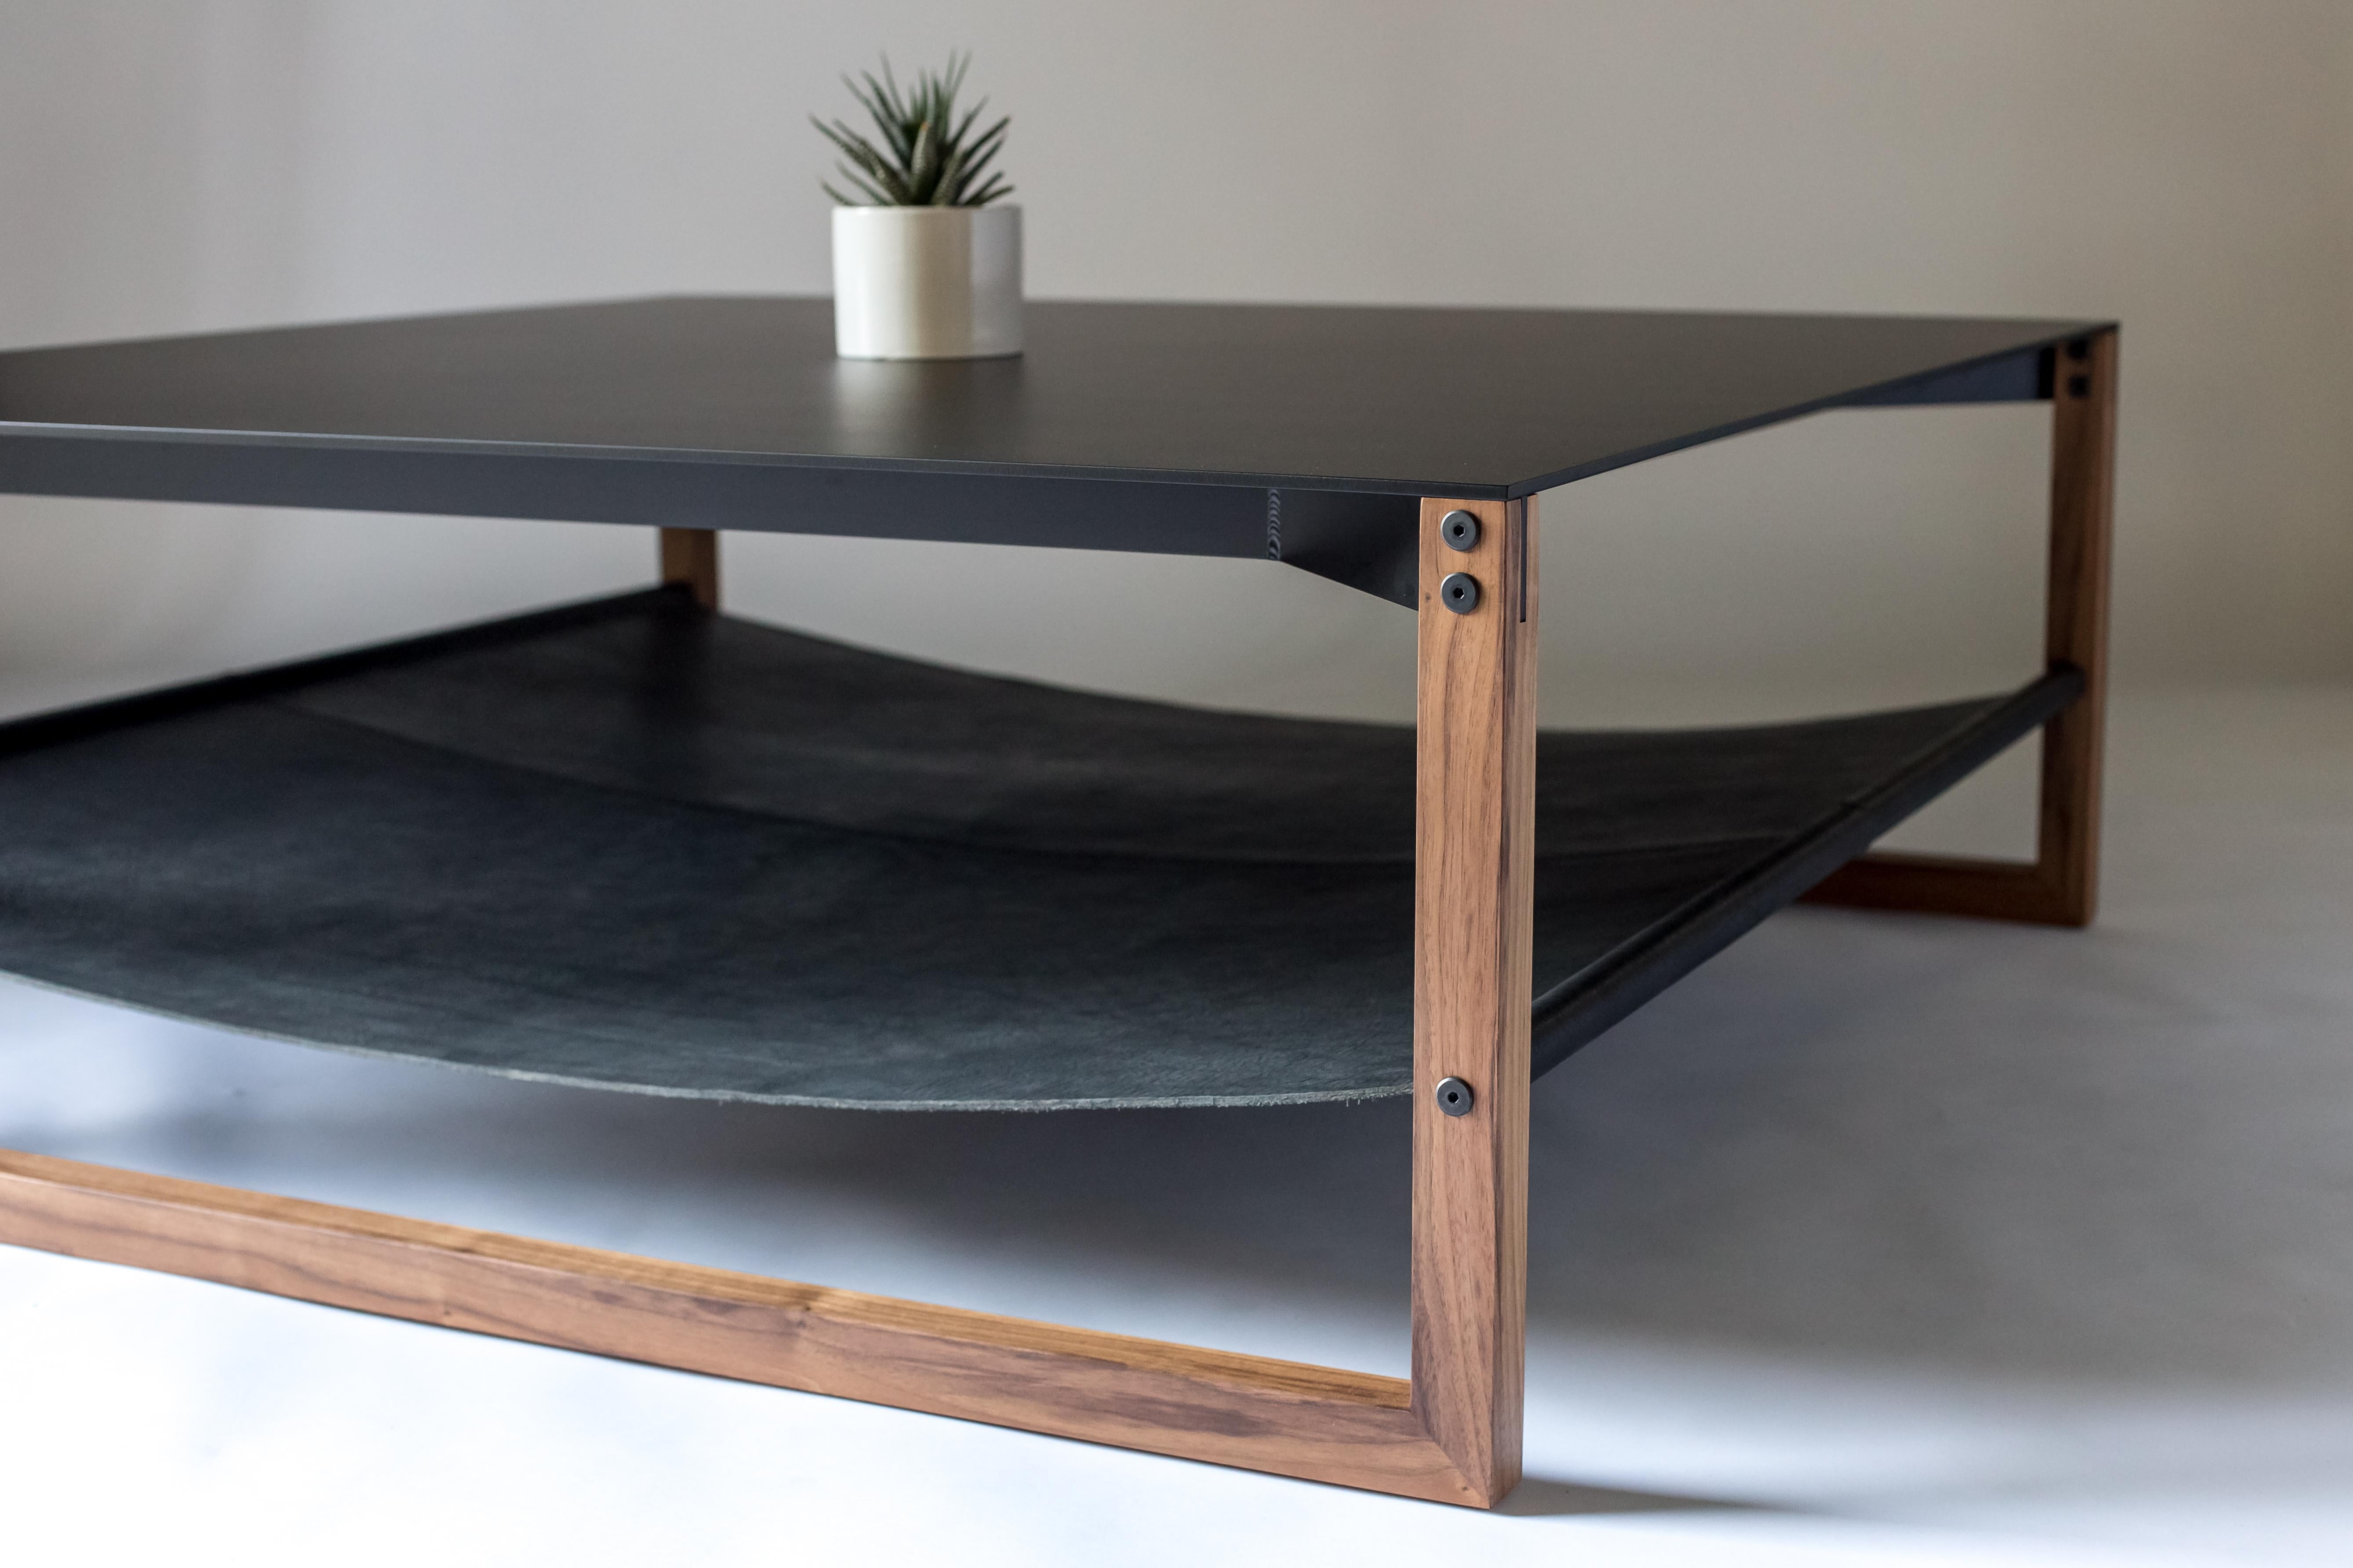 The Sling, Modern Aluminum, Leather and Walnut Square Coffee Table (Tischlerei) im Angebot